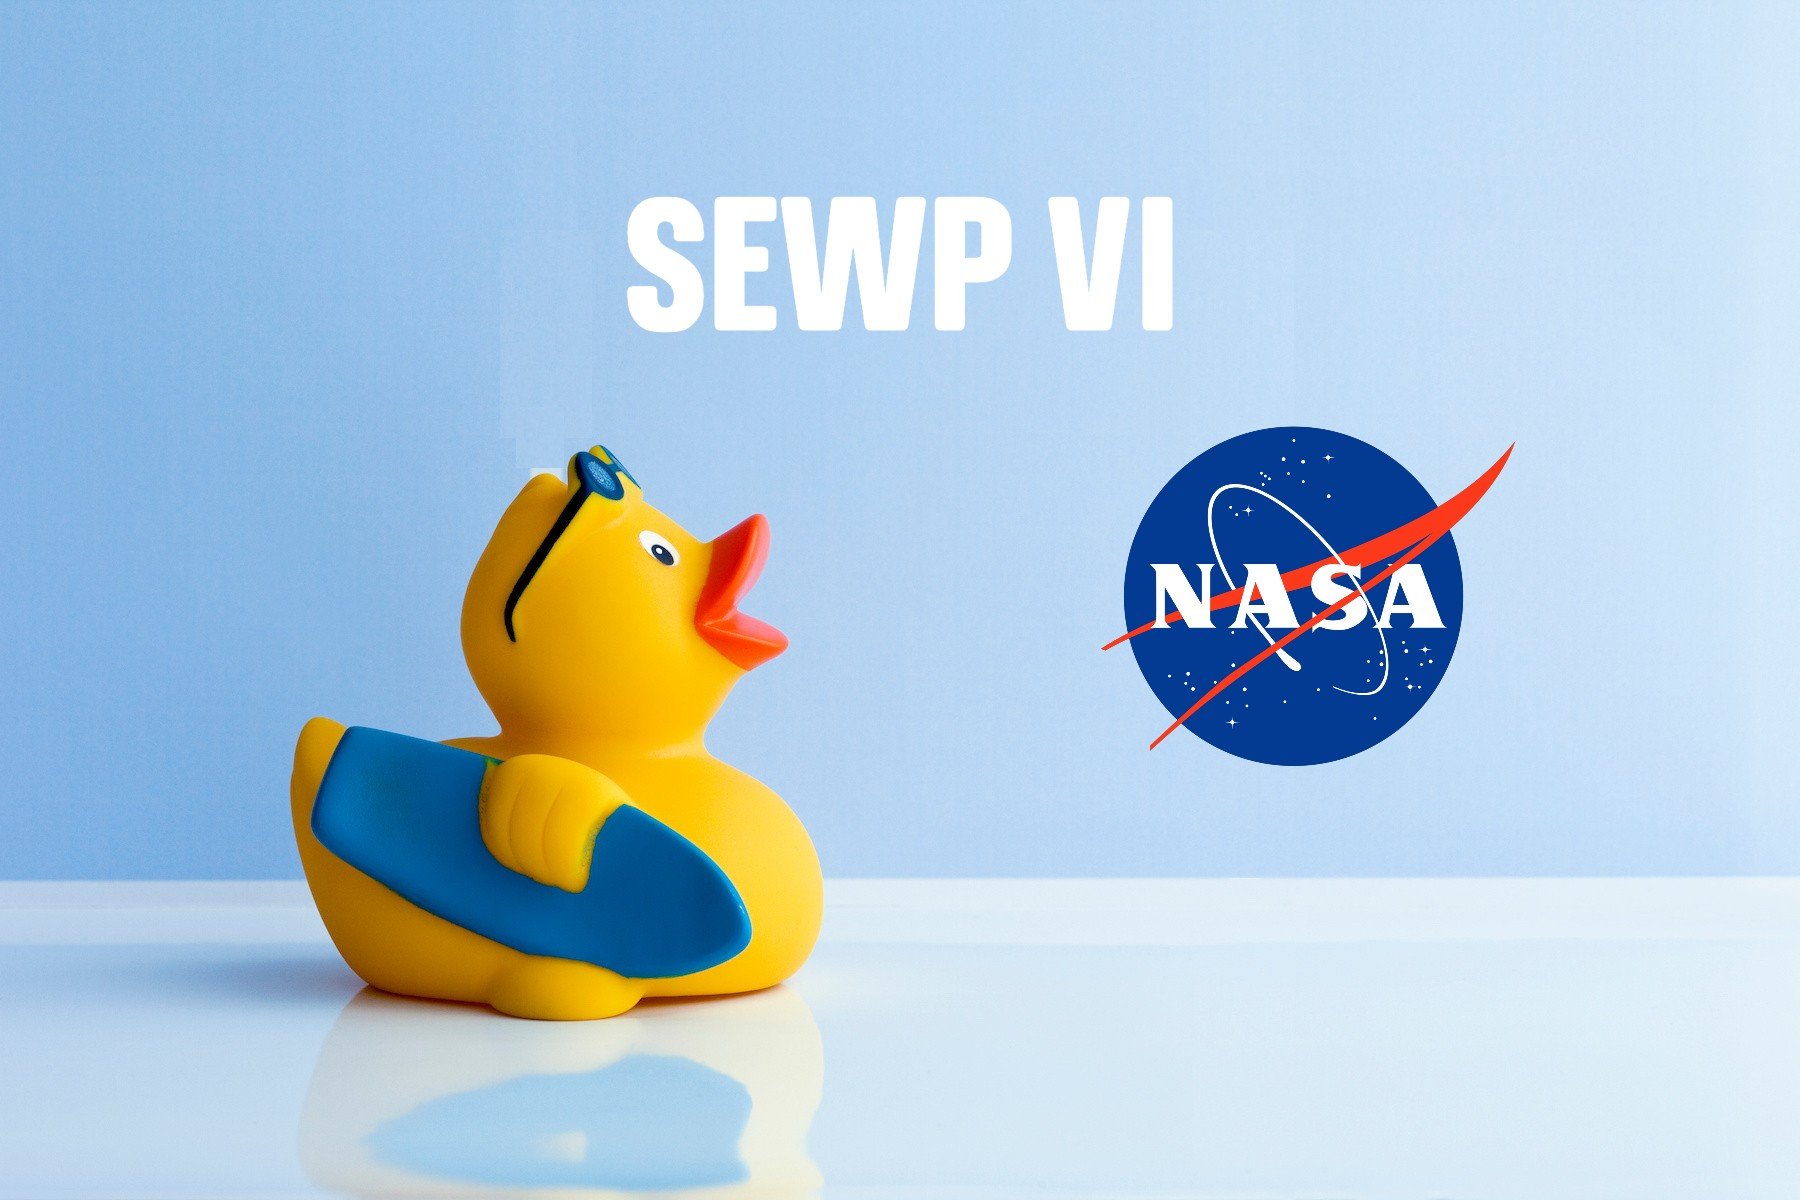 Get Ready for SEWP VI – The Next Big Wave in Government Contracting